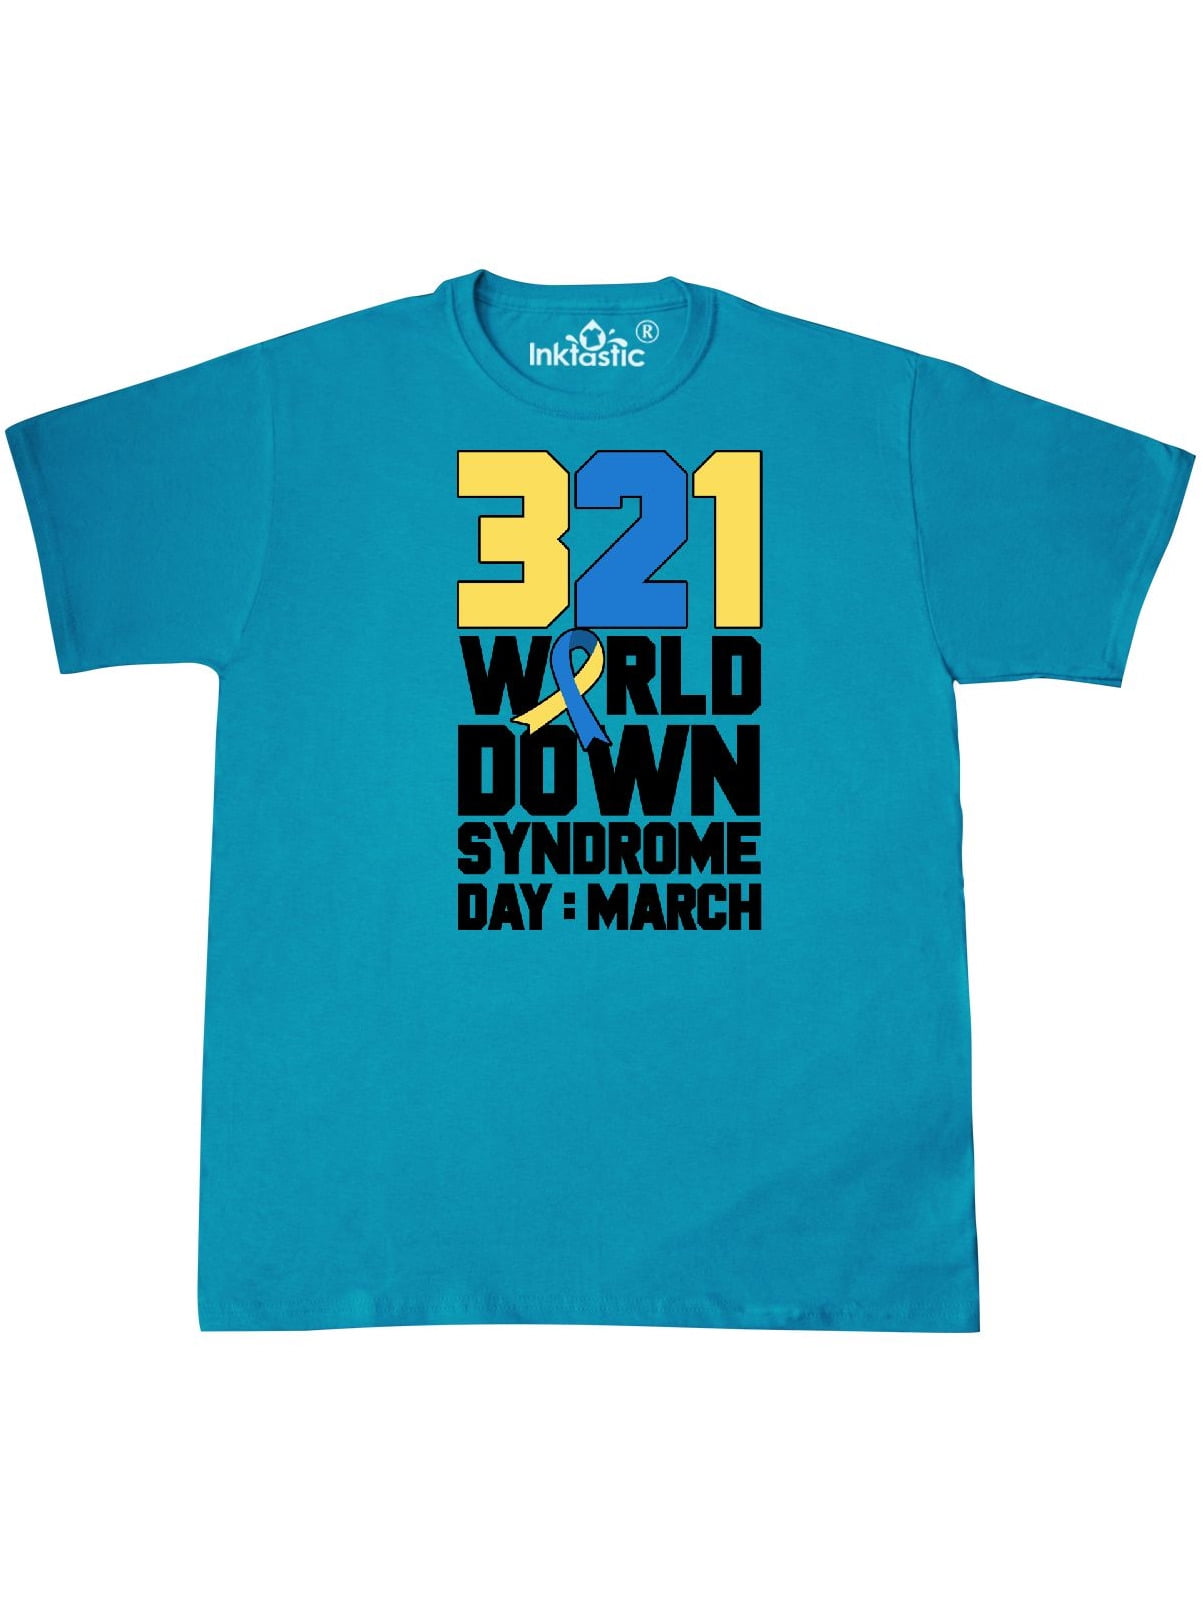 INKtastic - 321 is World Down Syndrome Day T-Shirt - Walmart.com ...